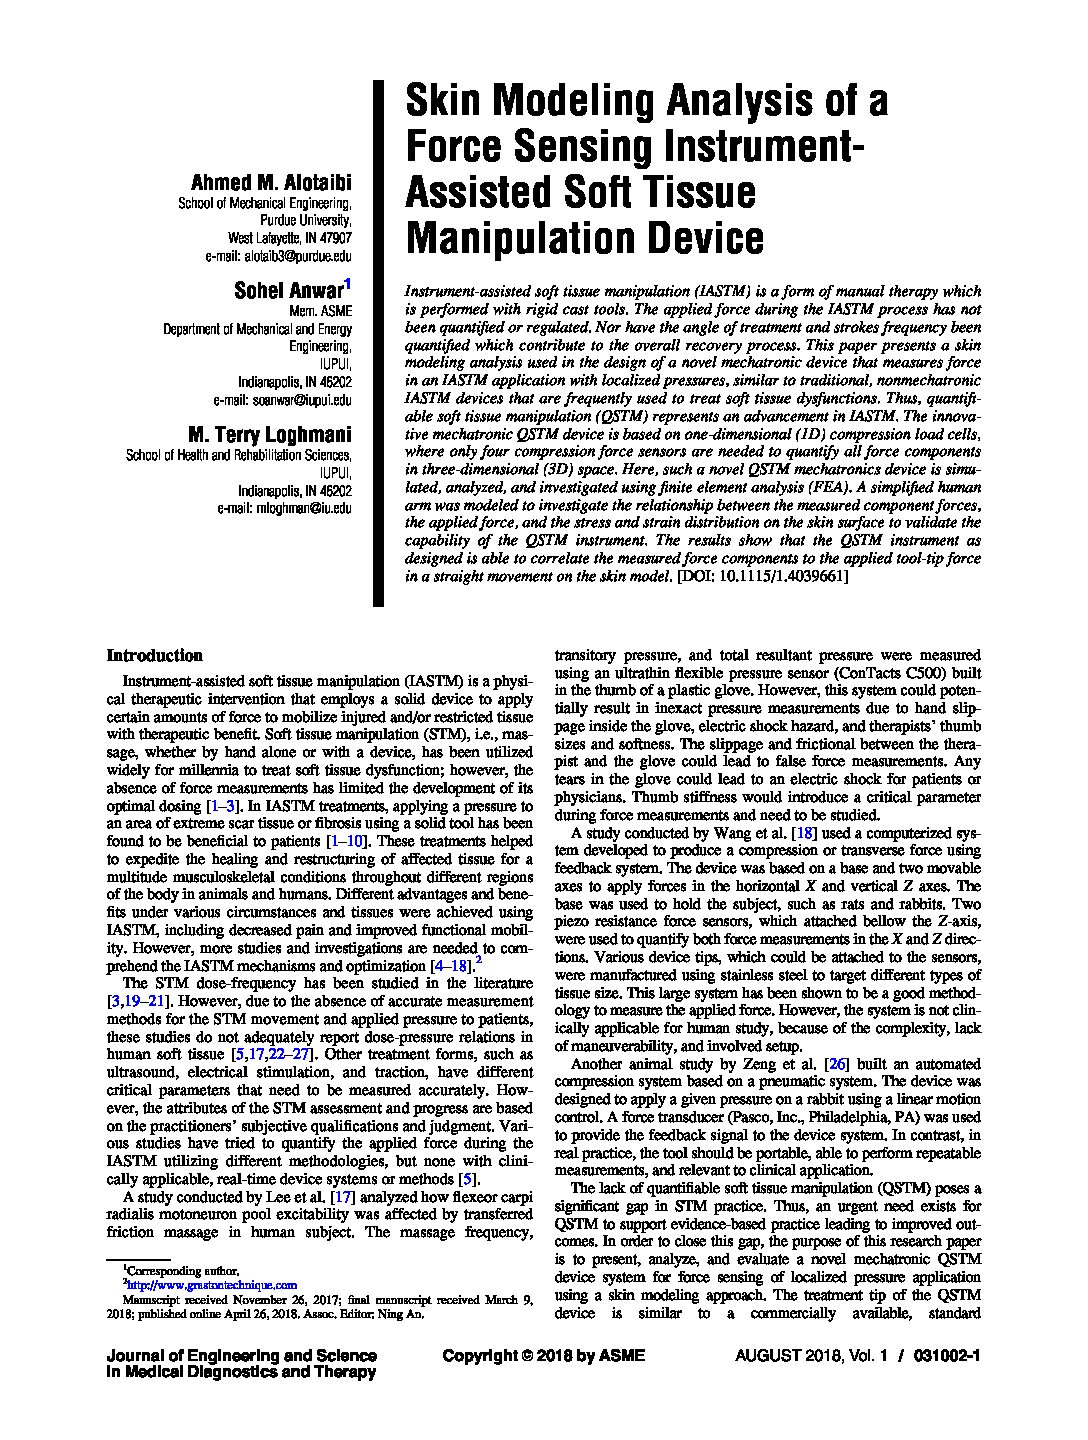 Skin Modeling Analysis of a Force Sensing Instrument- Assisted Soft Tissue Manipulation Device